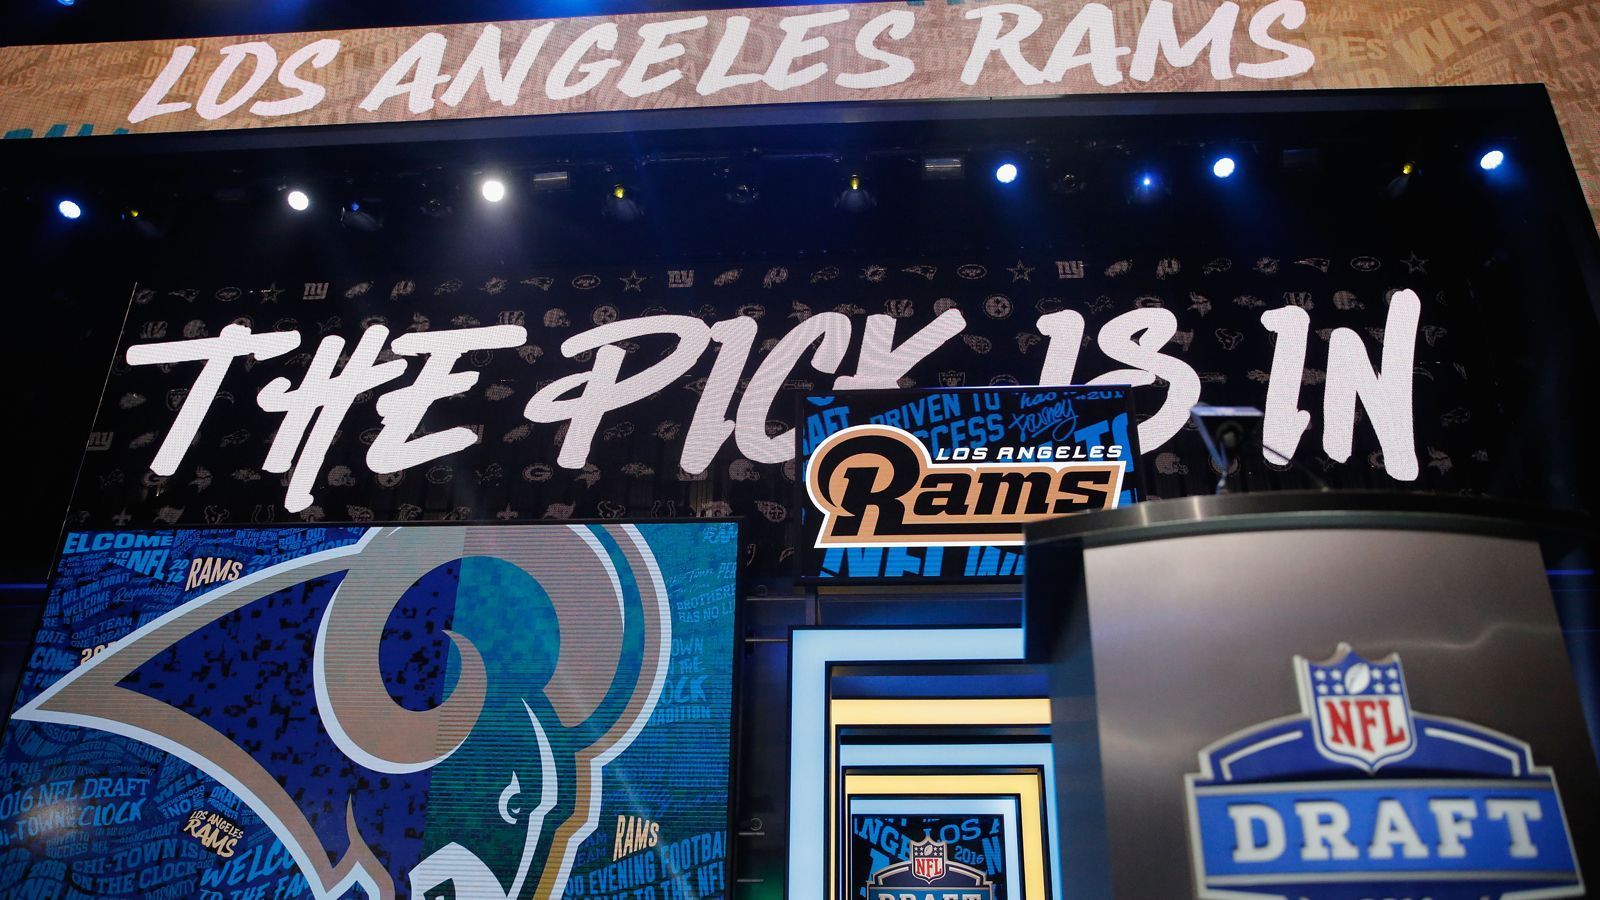 
                <strong>Los Angeles Rams</strong><br>
                2. Runde, Pick 52: RB Cam Akers2. Runde, Pick 57: WR Van Jefferson3. Runde, Pick 84: OLB Terrell Lewis3. Runde, Pick 104 (Compensatory Pick): S Terrell Burgess6. Runde, Pick 136: TE Brycen Hopkins6. Runde, Pick 199: S Jordan Fuller7. Runde, Pick 234: LB Clay Johnston7. Runde, Pick 248: K Sam Sloman7. Runde, Pick 250: G Tremayne Anchrum
              